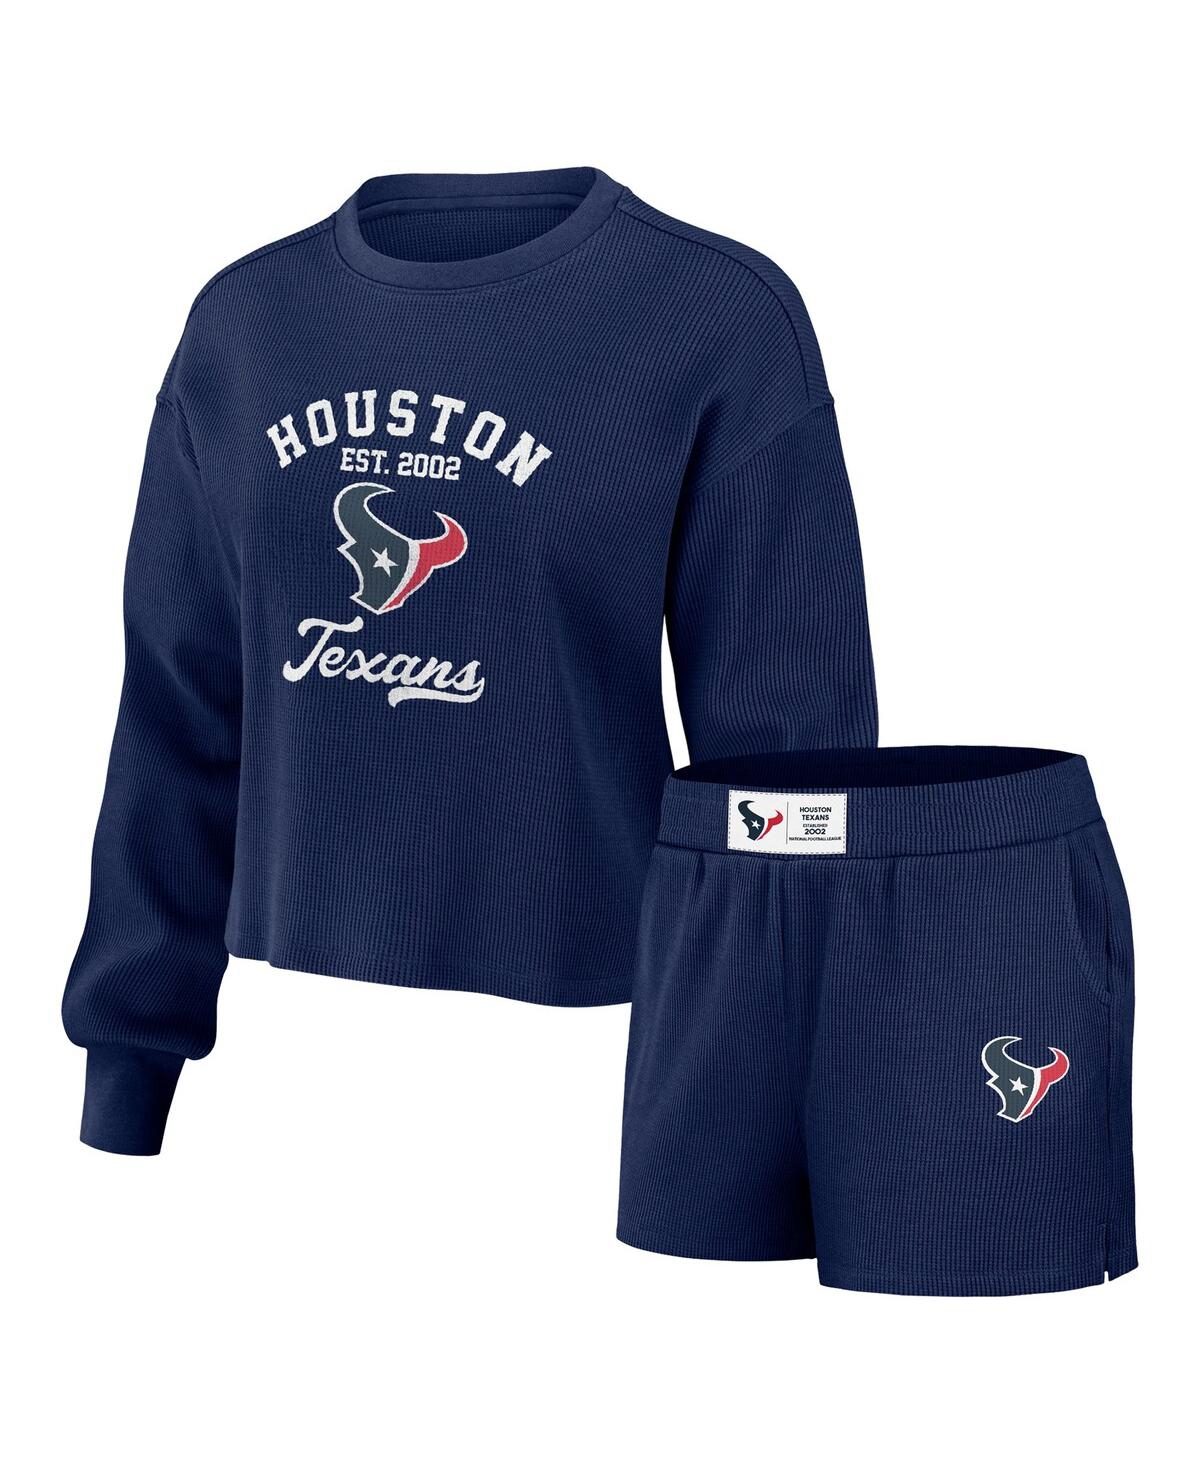 Shop Wear By Erin Andrews Women's  Navy Distressed Houston Texans Waffle Knit Long Sleeve T-shirt And Shor